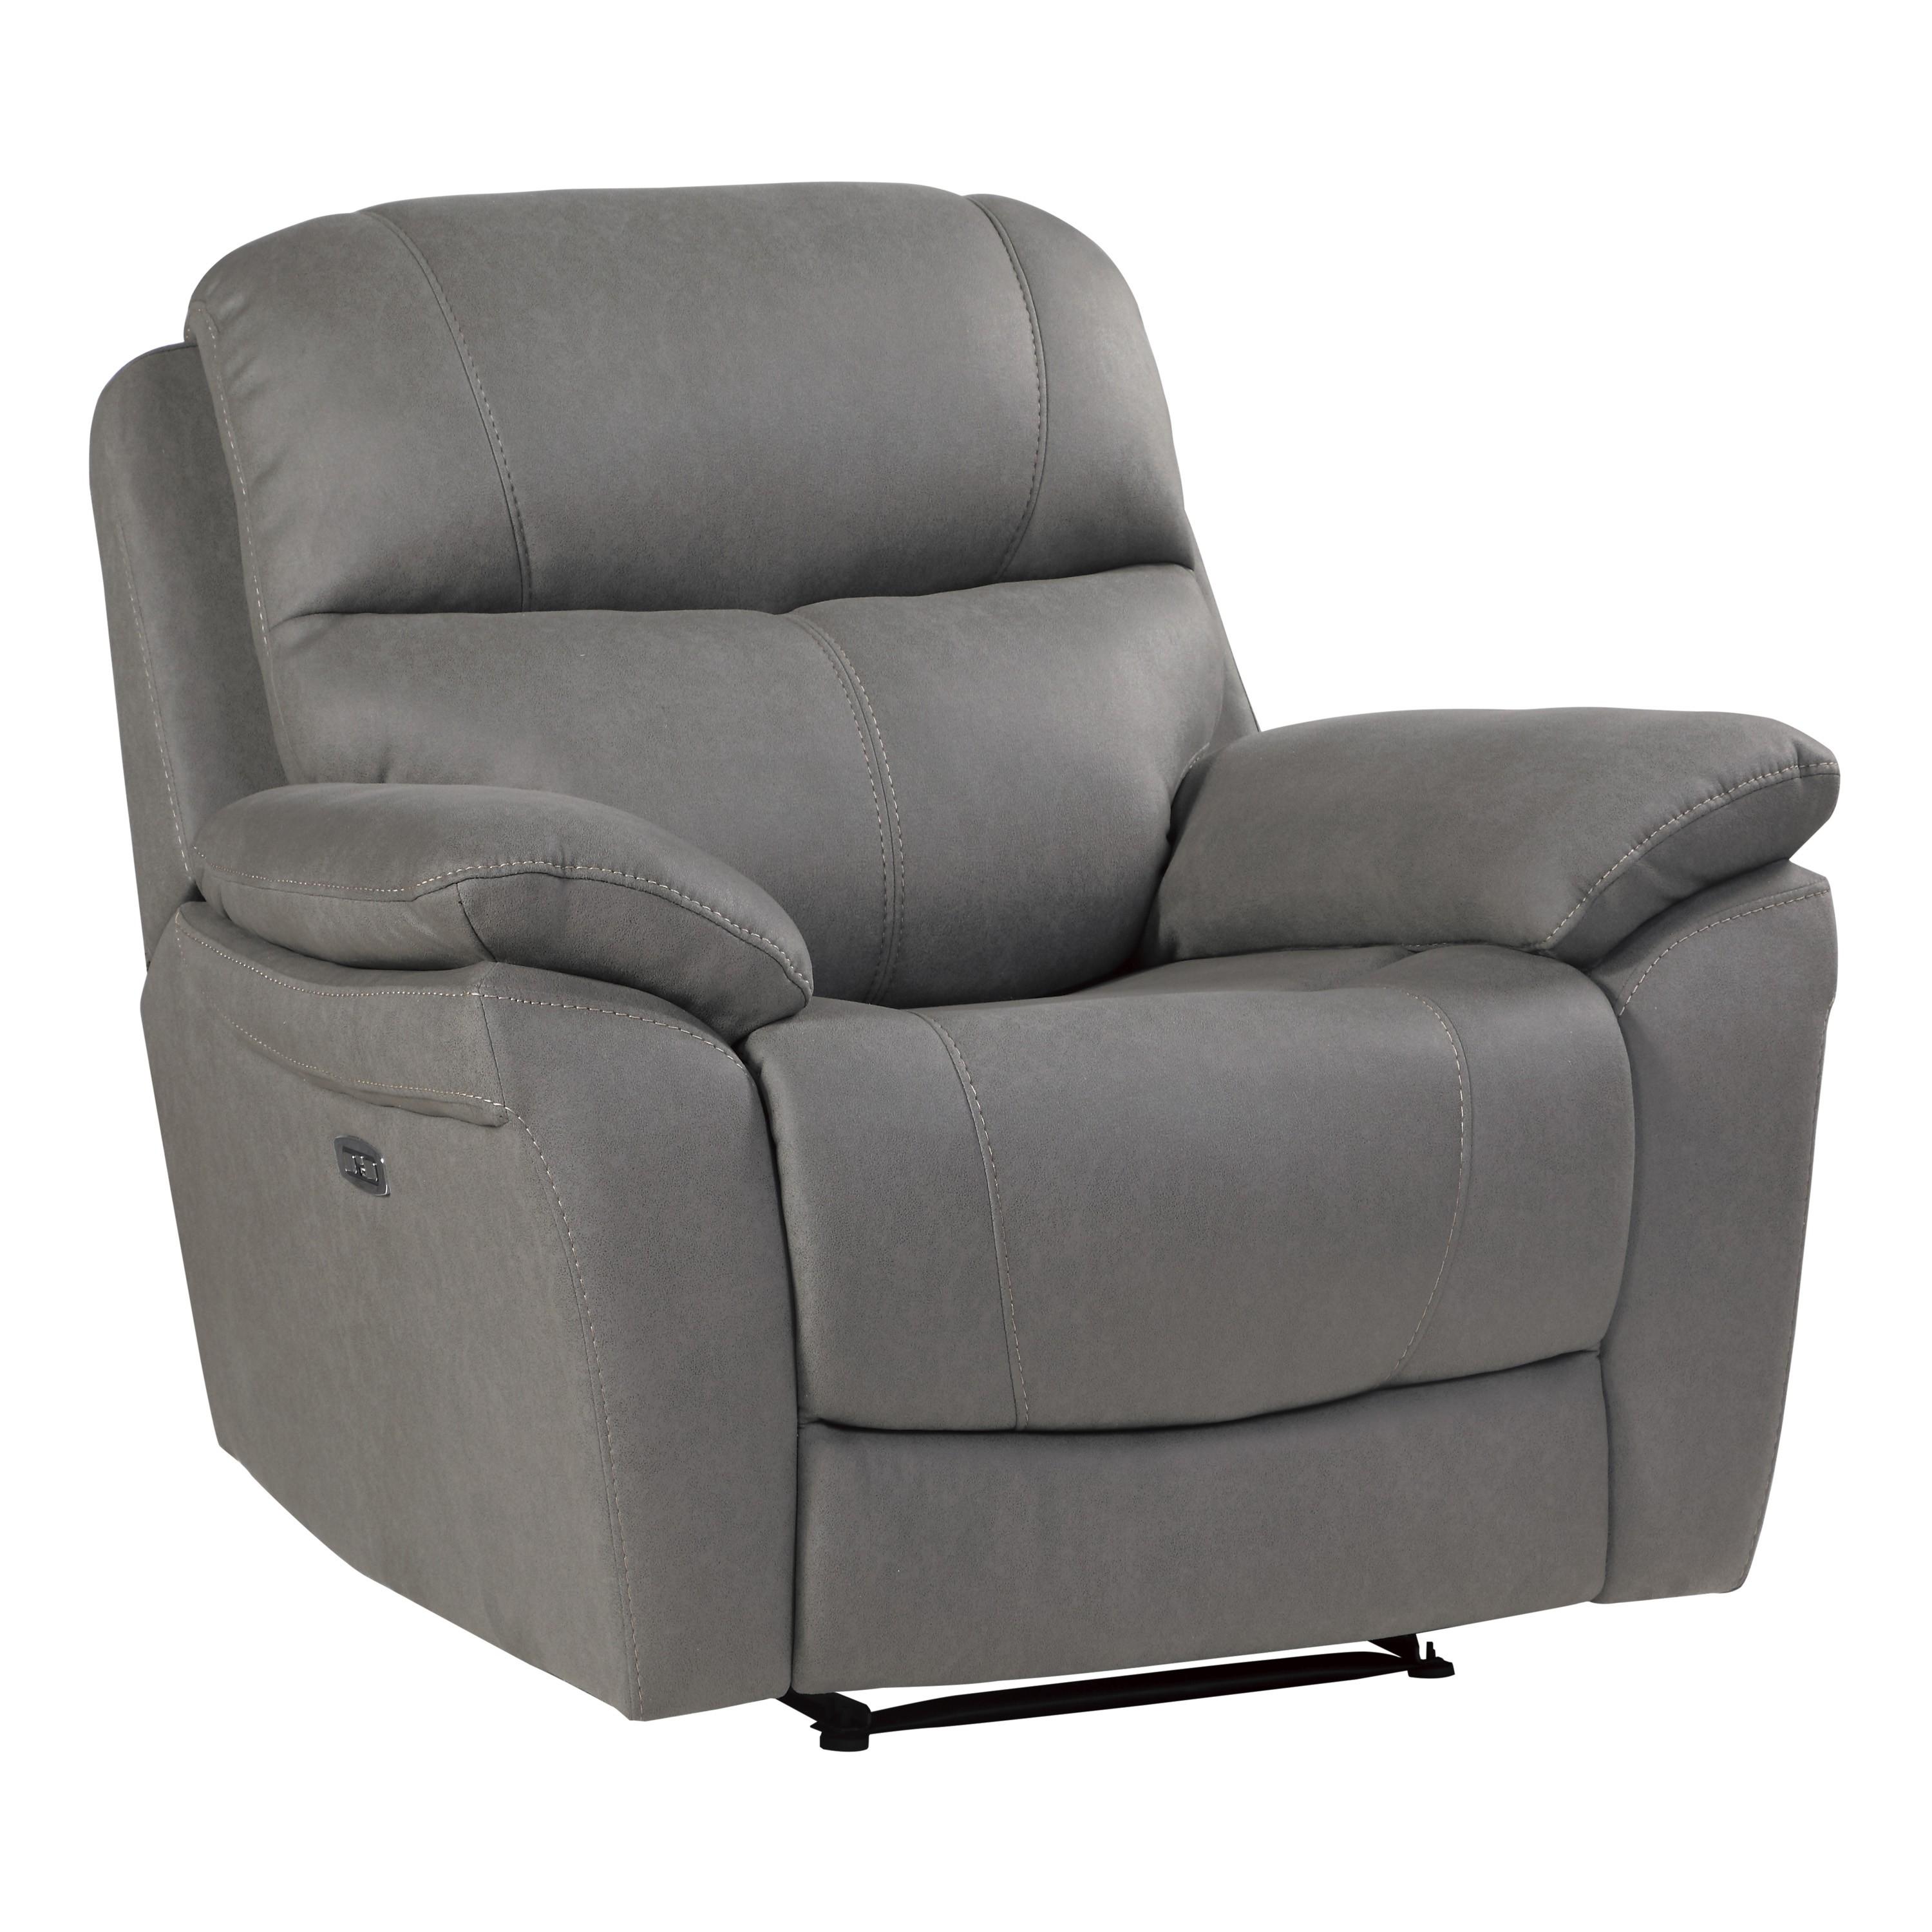 Transitional Power Reclining Chair 9580GY-1PWH Longvale 9580GY-1PWH in Gray Microfiber